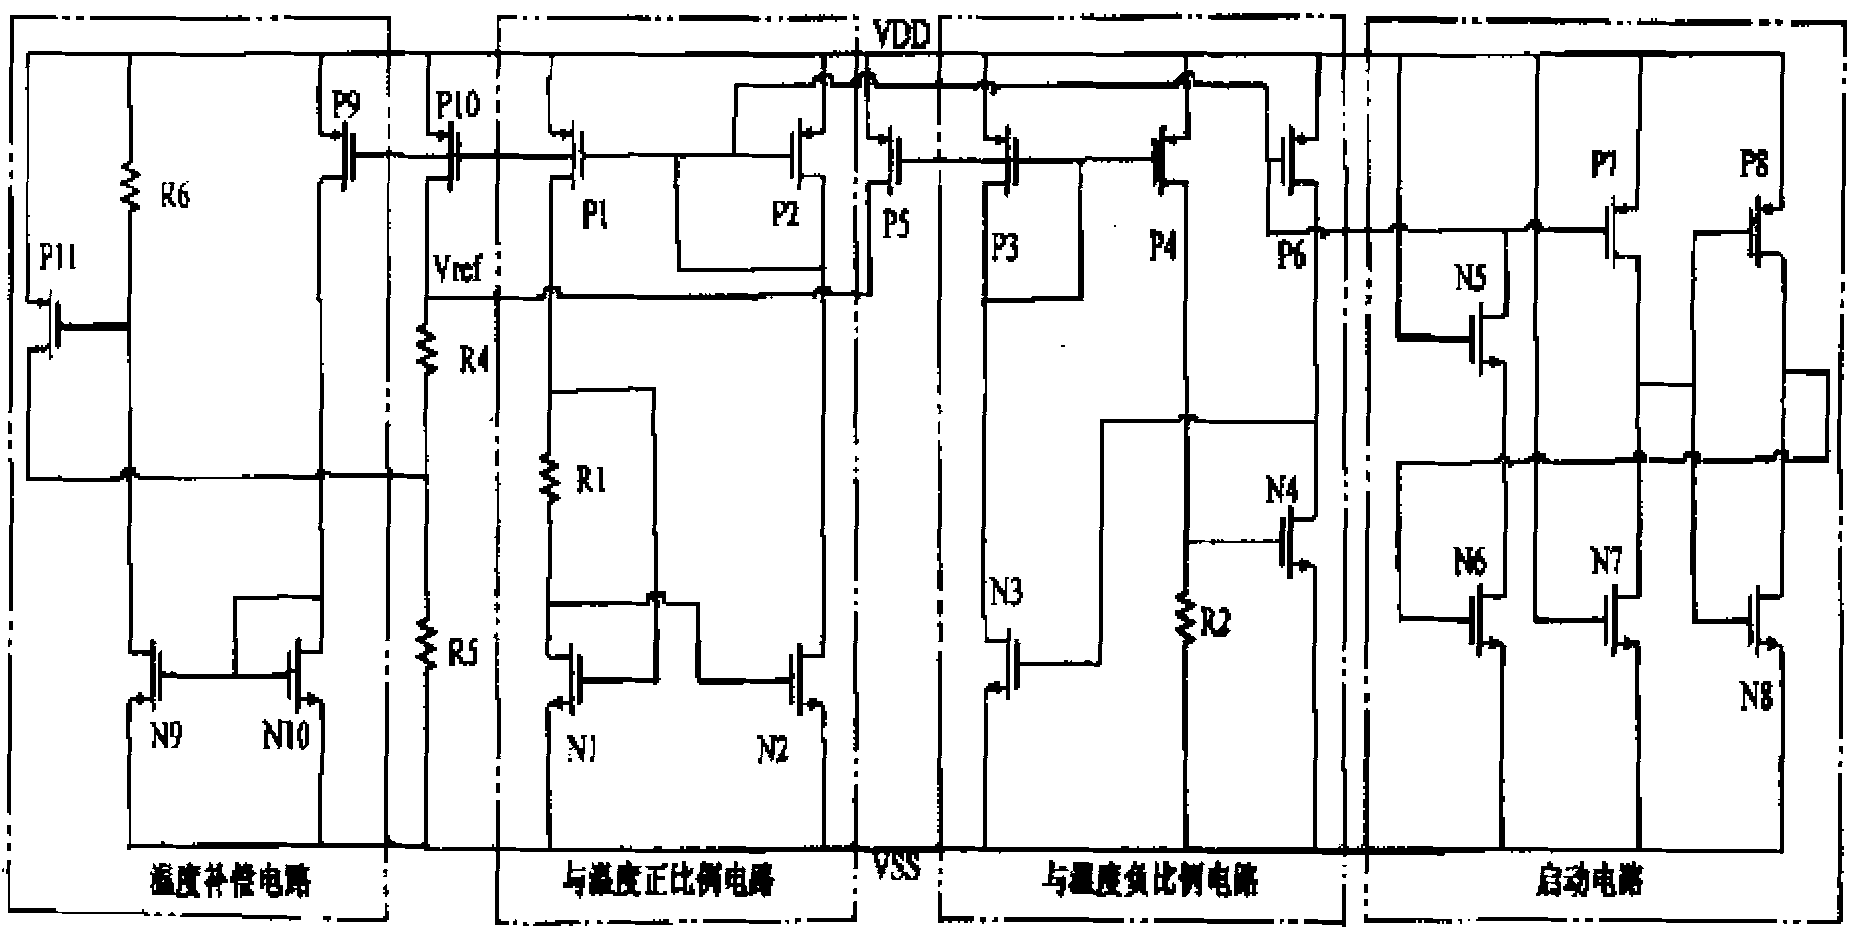 Low-voltage low-power band gap reference voltage source implemented by MOS device